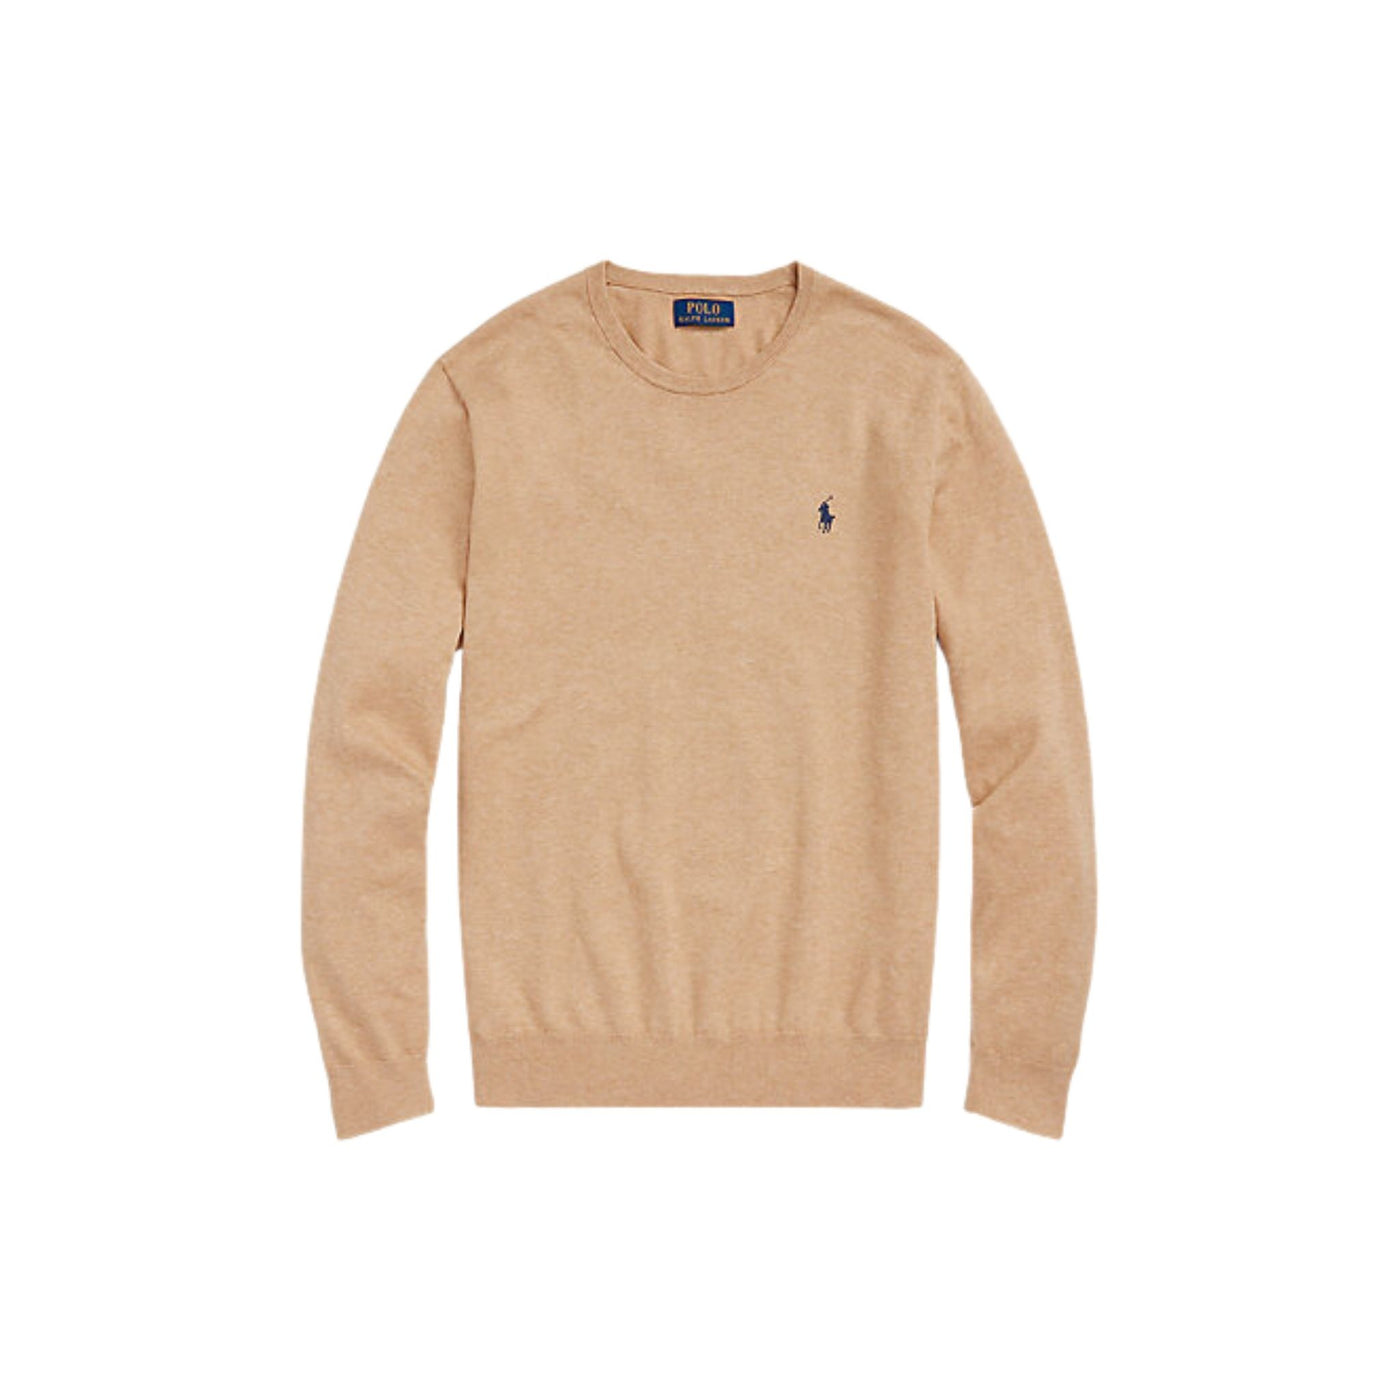 Men's sweater with textured effect